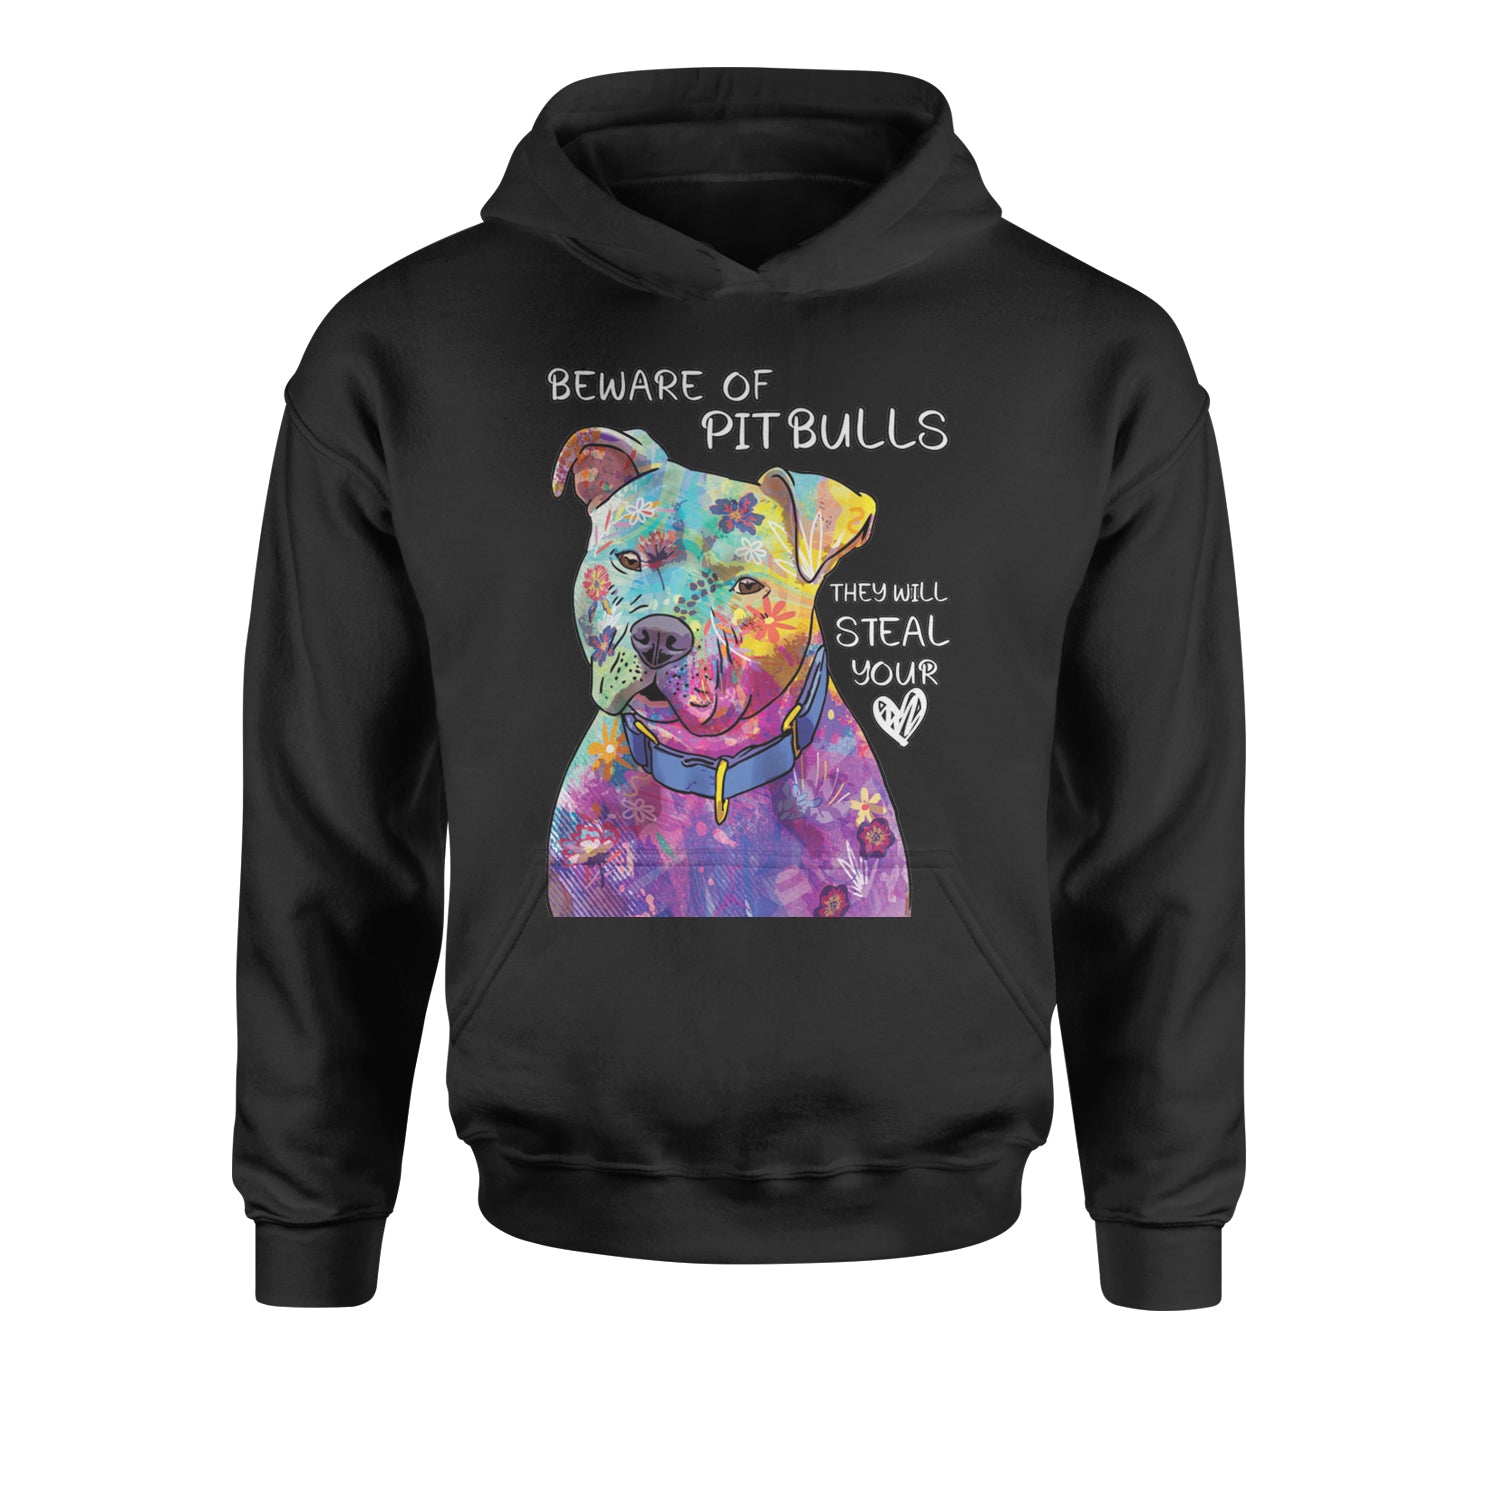 Beware Of Pit Bulls, They Will Steal Your Heart  Youth-Sized Hoodie